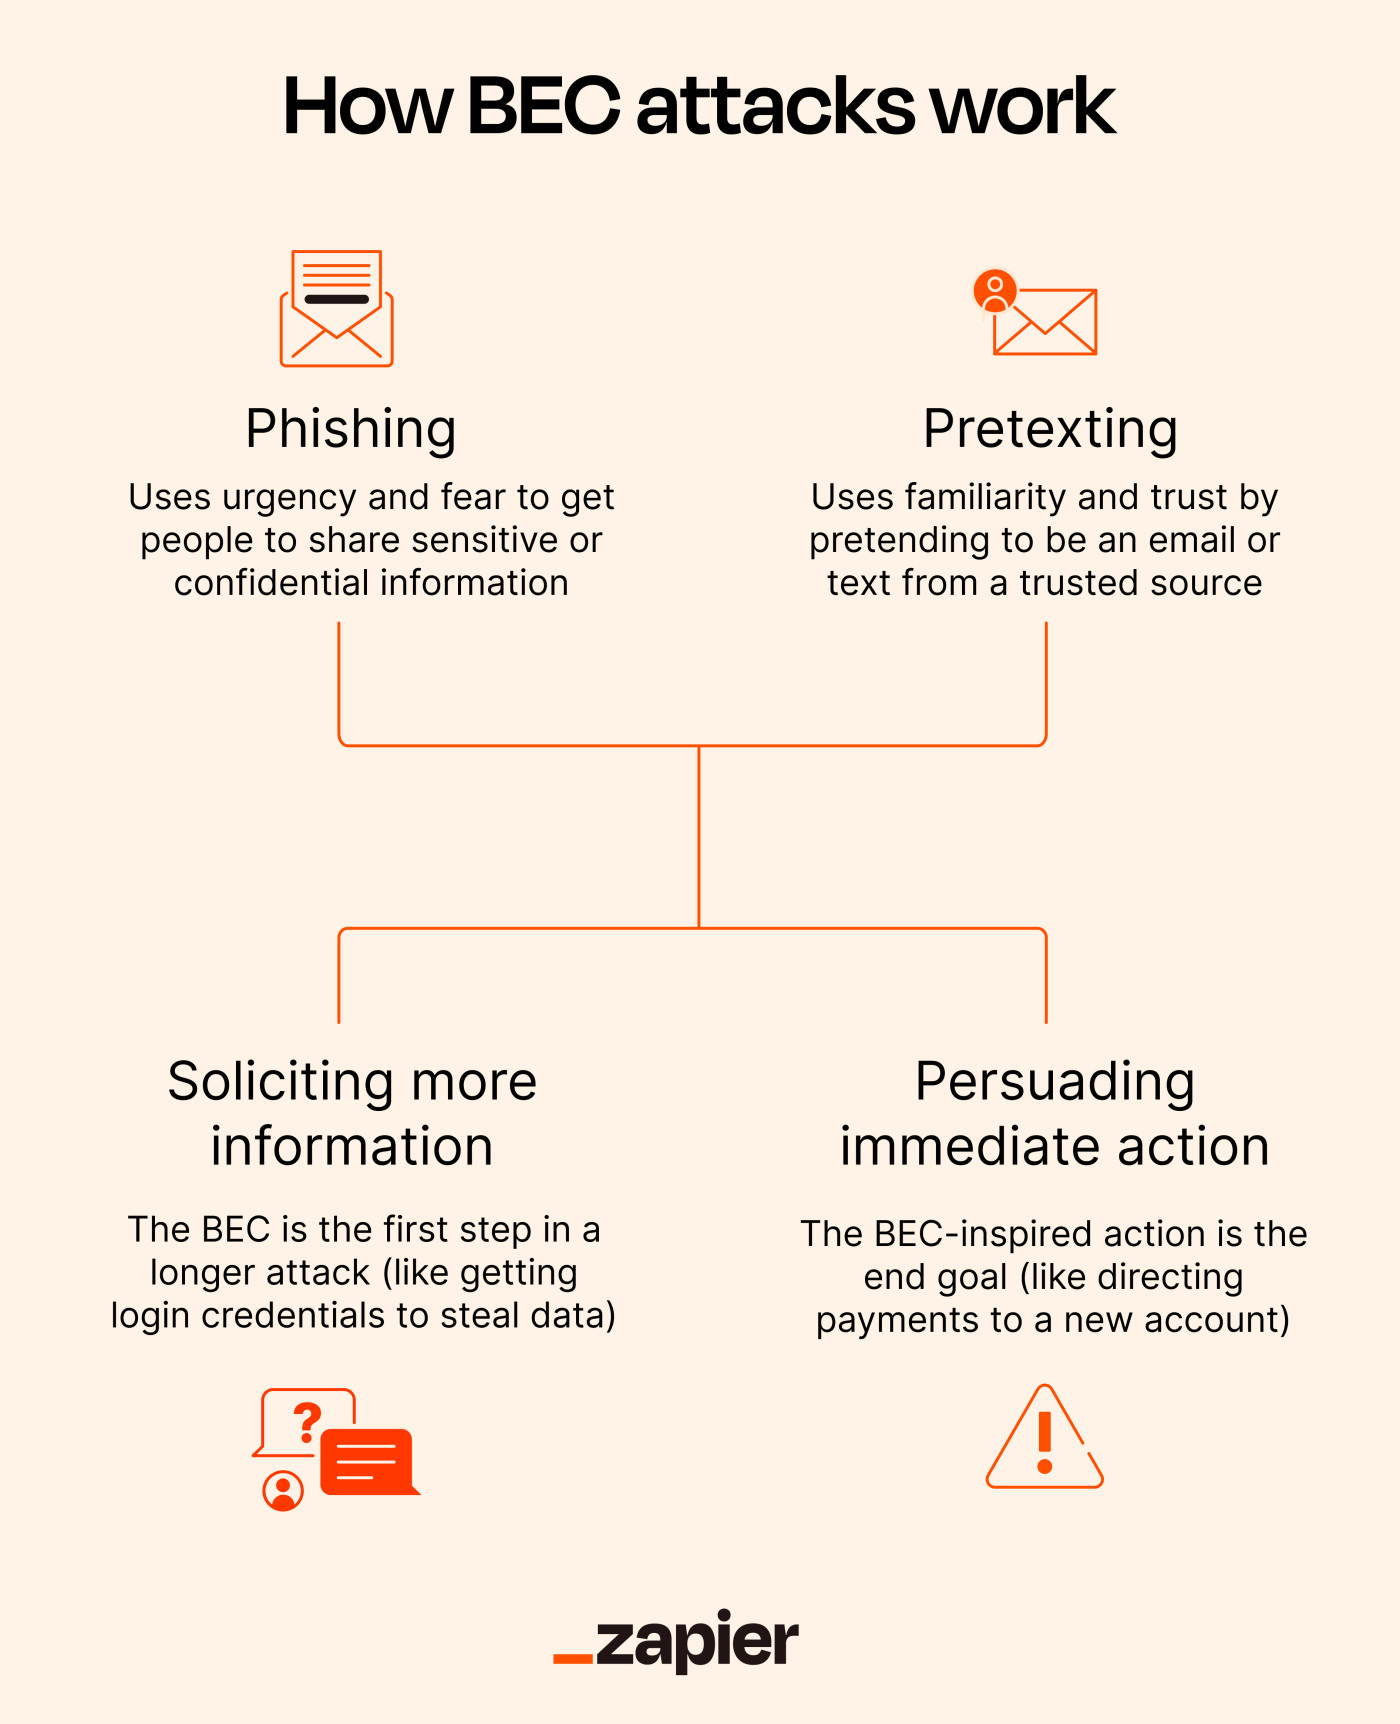 An infographic showing how BEC attacks work